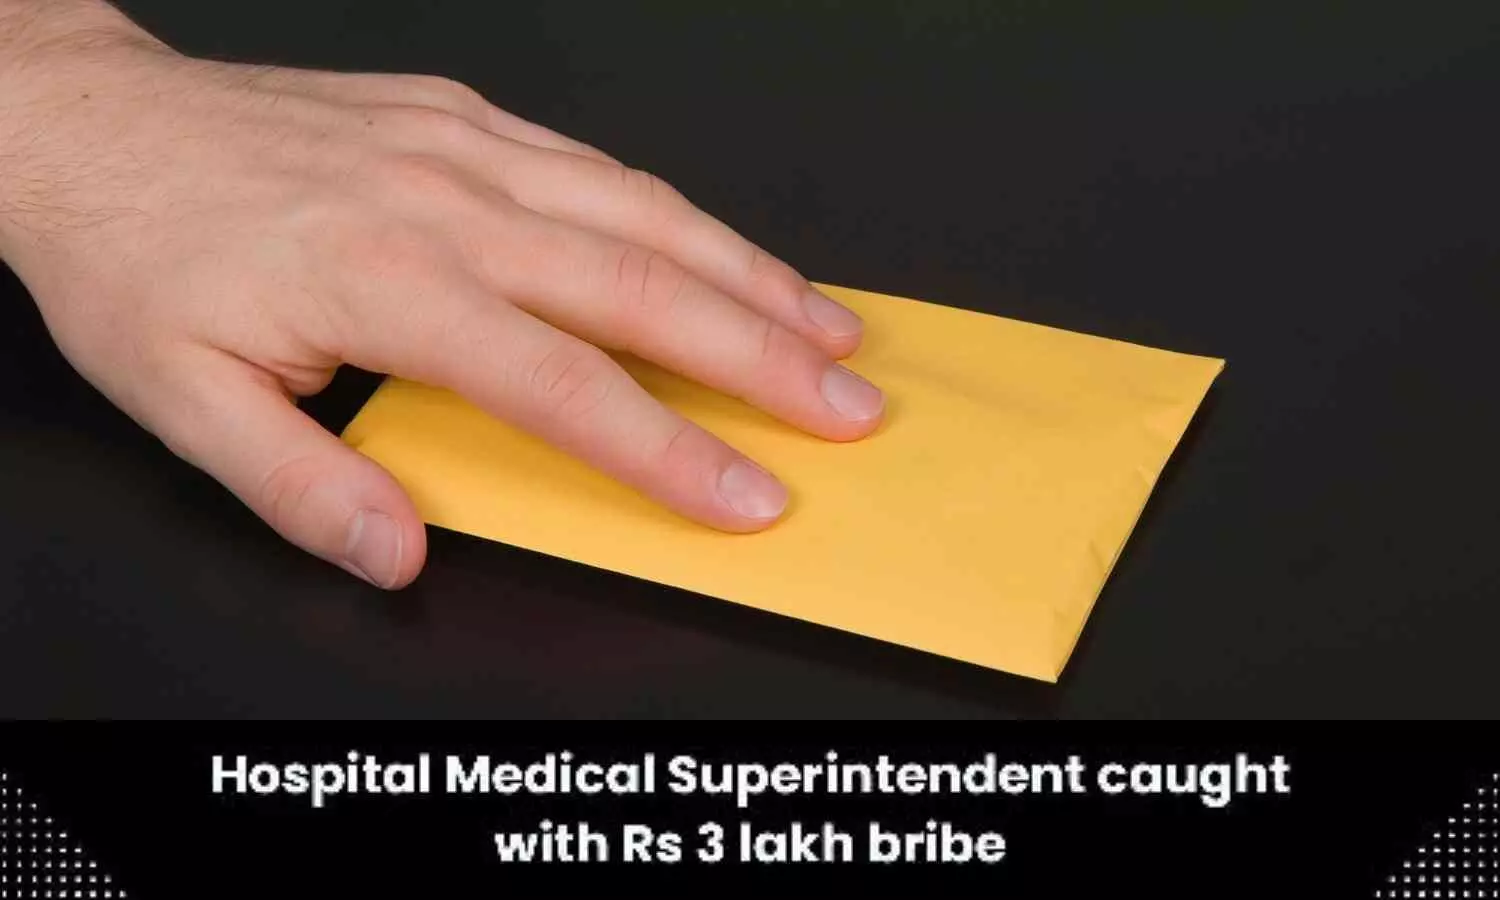 Government Hospital Superintendent caught taking Rs 3 lakh bribe